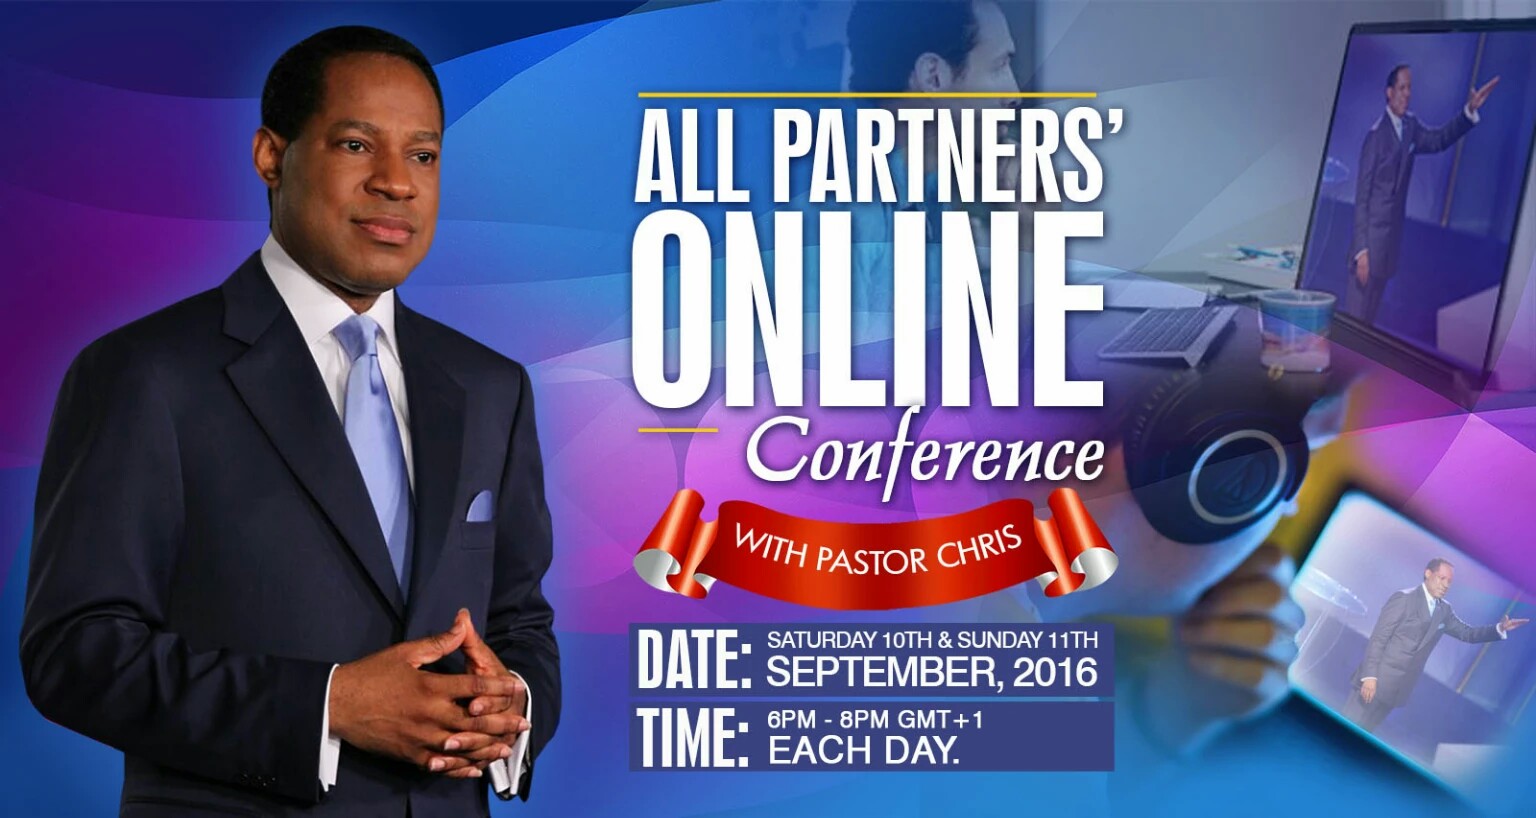 Partners Online Conference with Pastor Chris